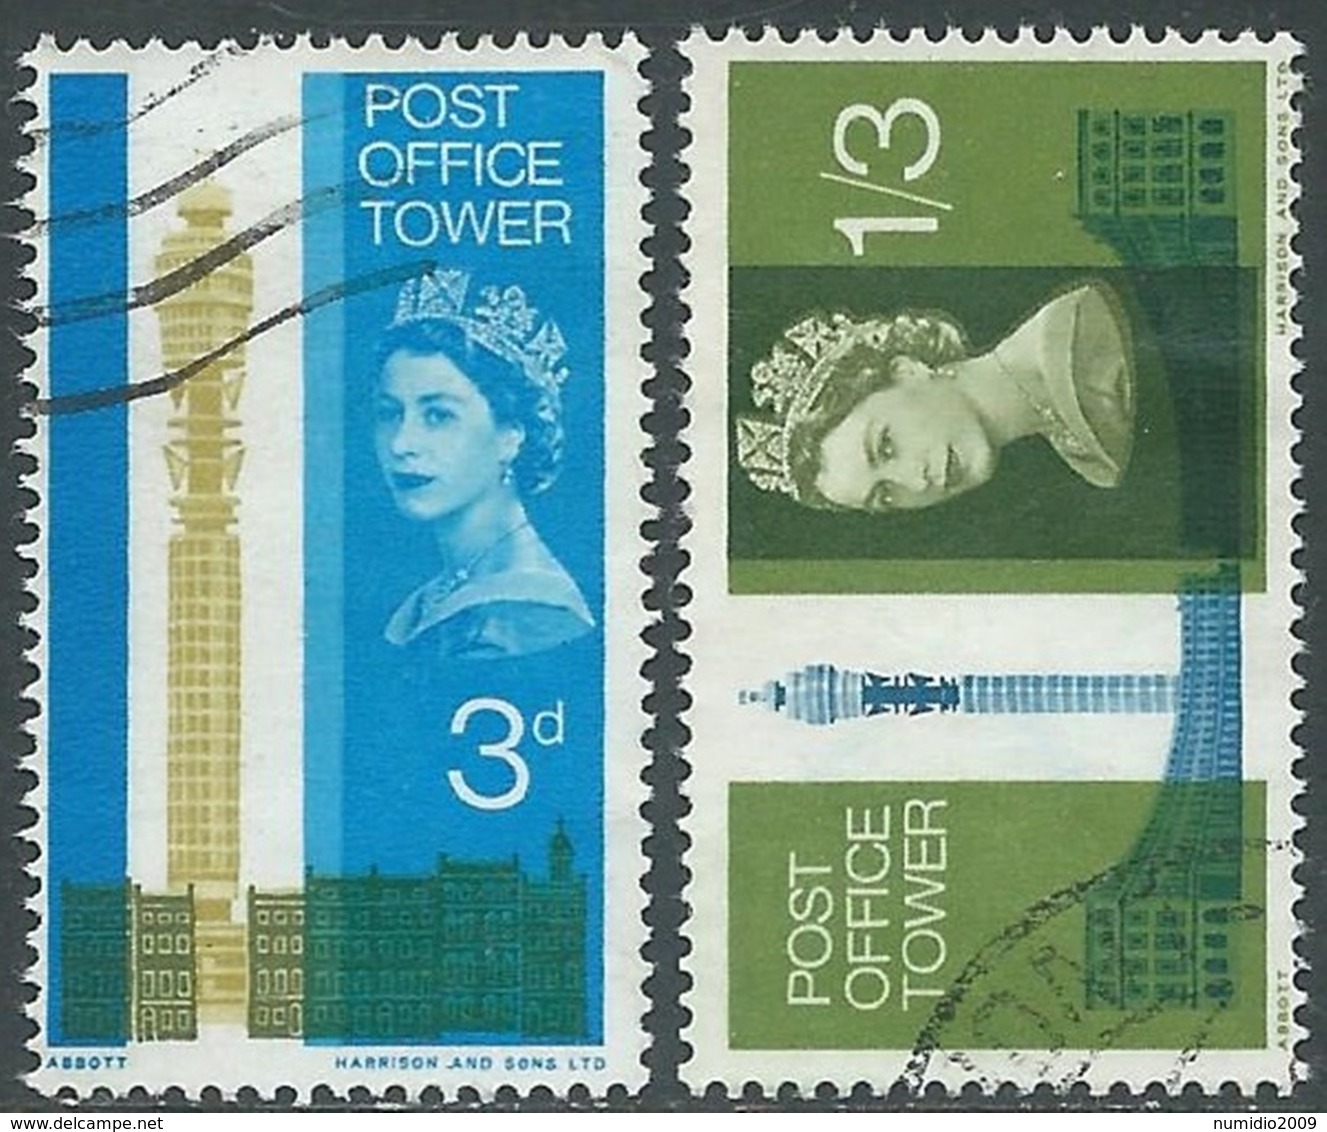 1965 GREAT BRITAIN USED OPENING OF POST OFFICE TOWER SG 679/80 - RC3-5 - Oblitérés